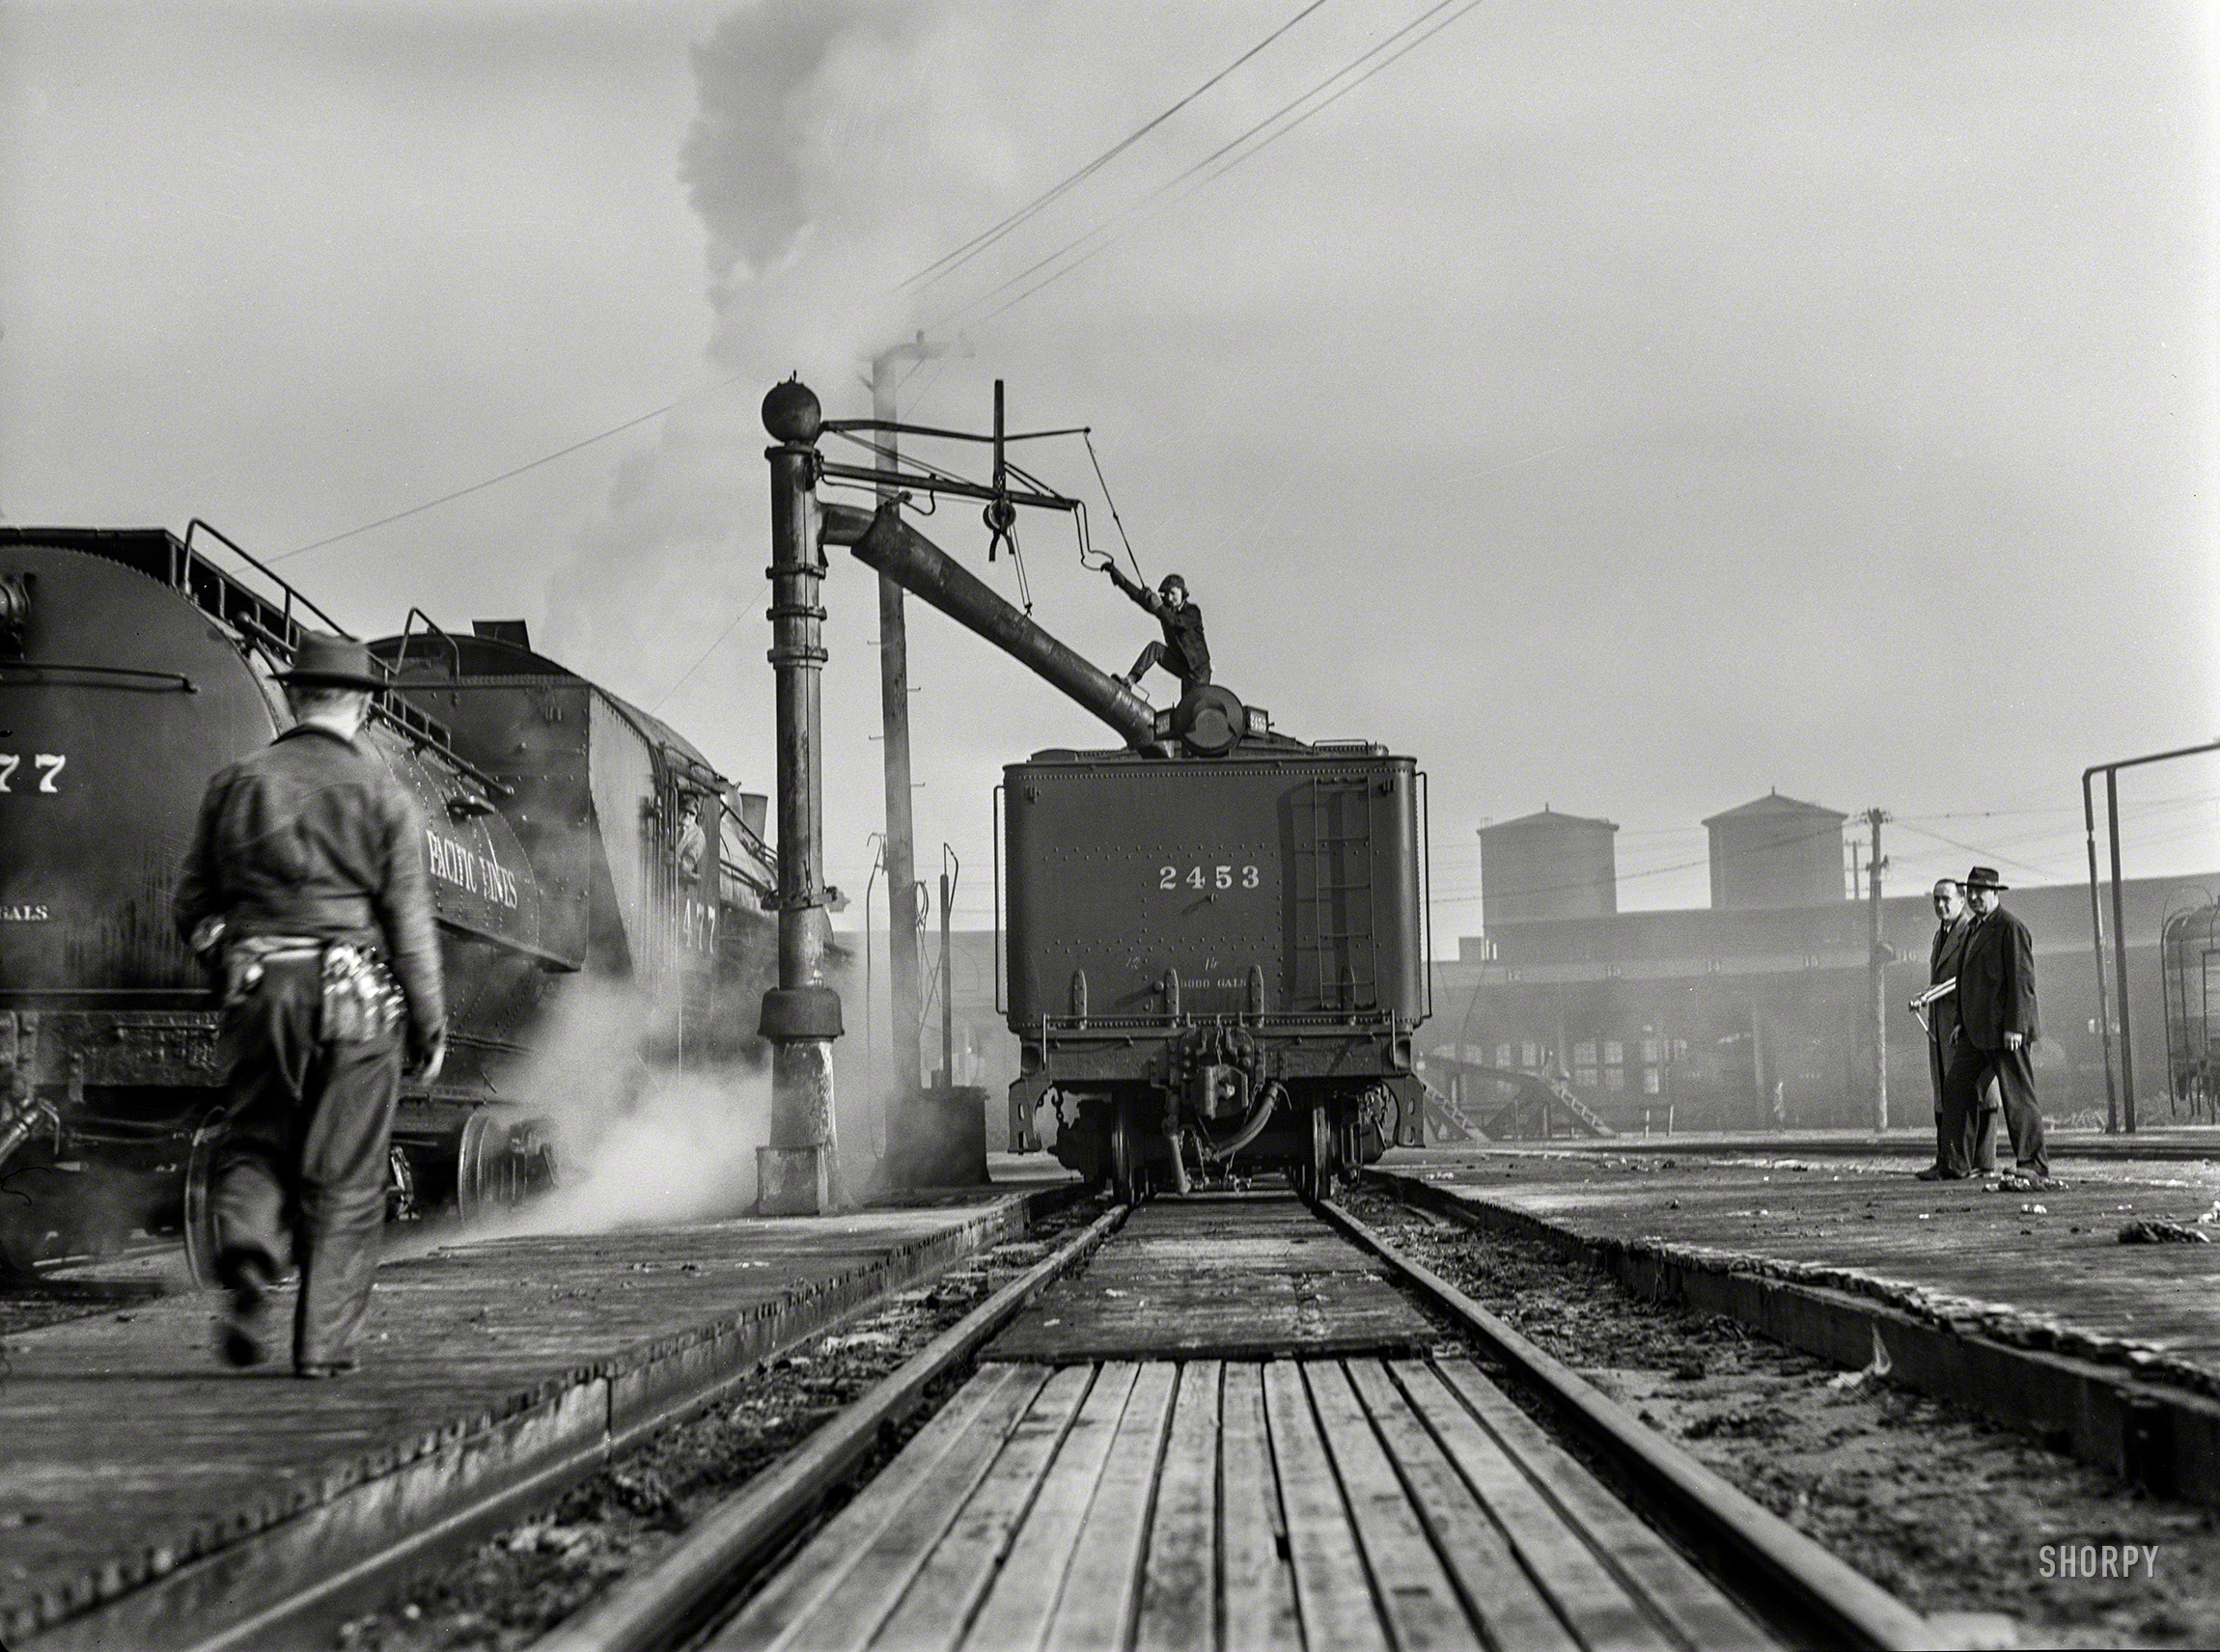 February 1943. "Women in essential services. Women railroad workers take over the care and maintenance of freight and passenger trains in the Southern Pacific Company yards at San Francisco, California." Medium-format negative by Ann Rosener for the Office of War Information. View full size.